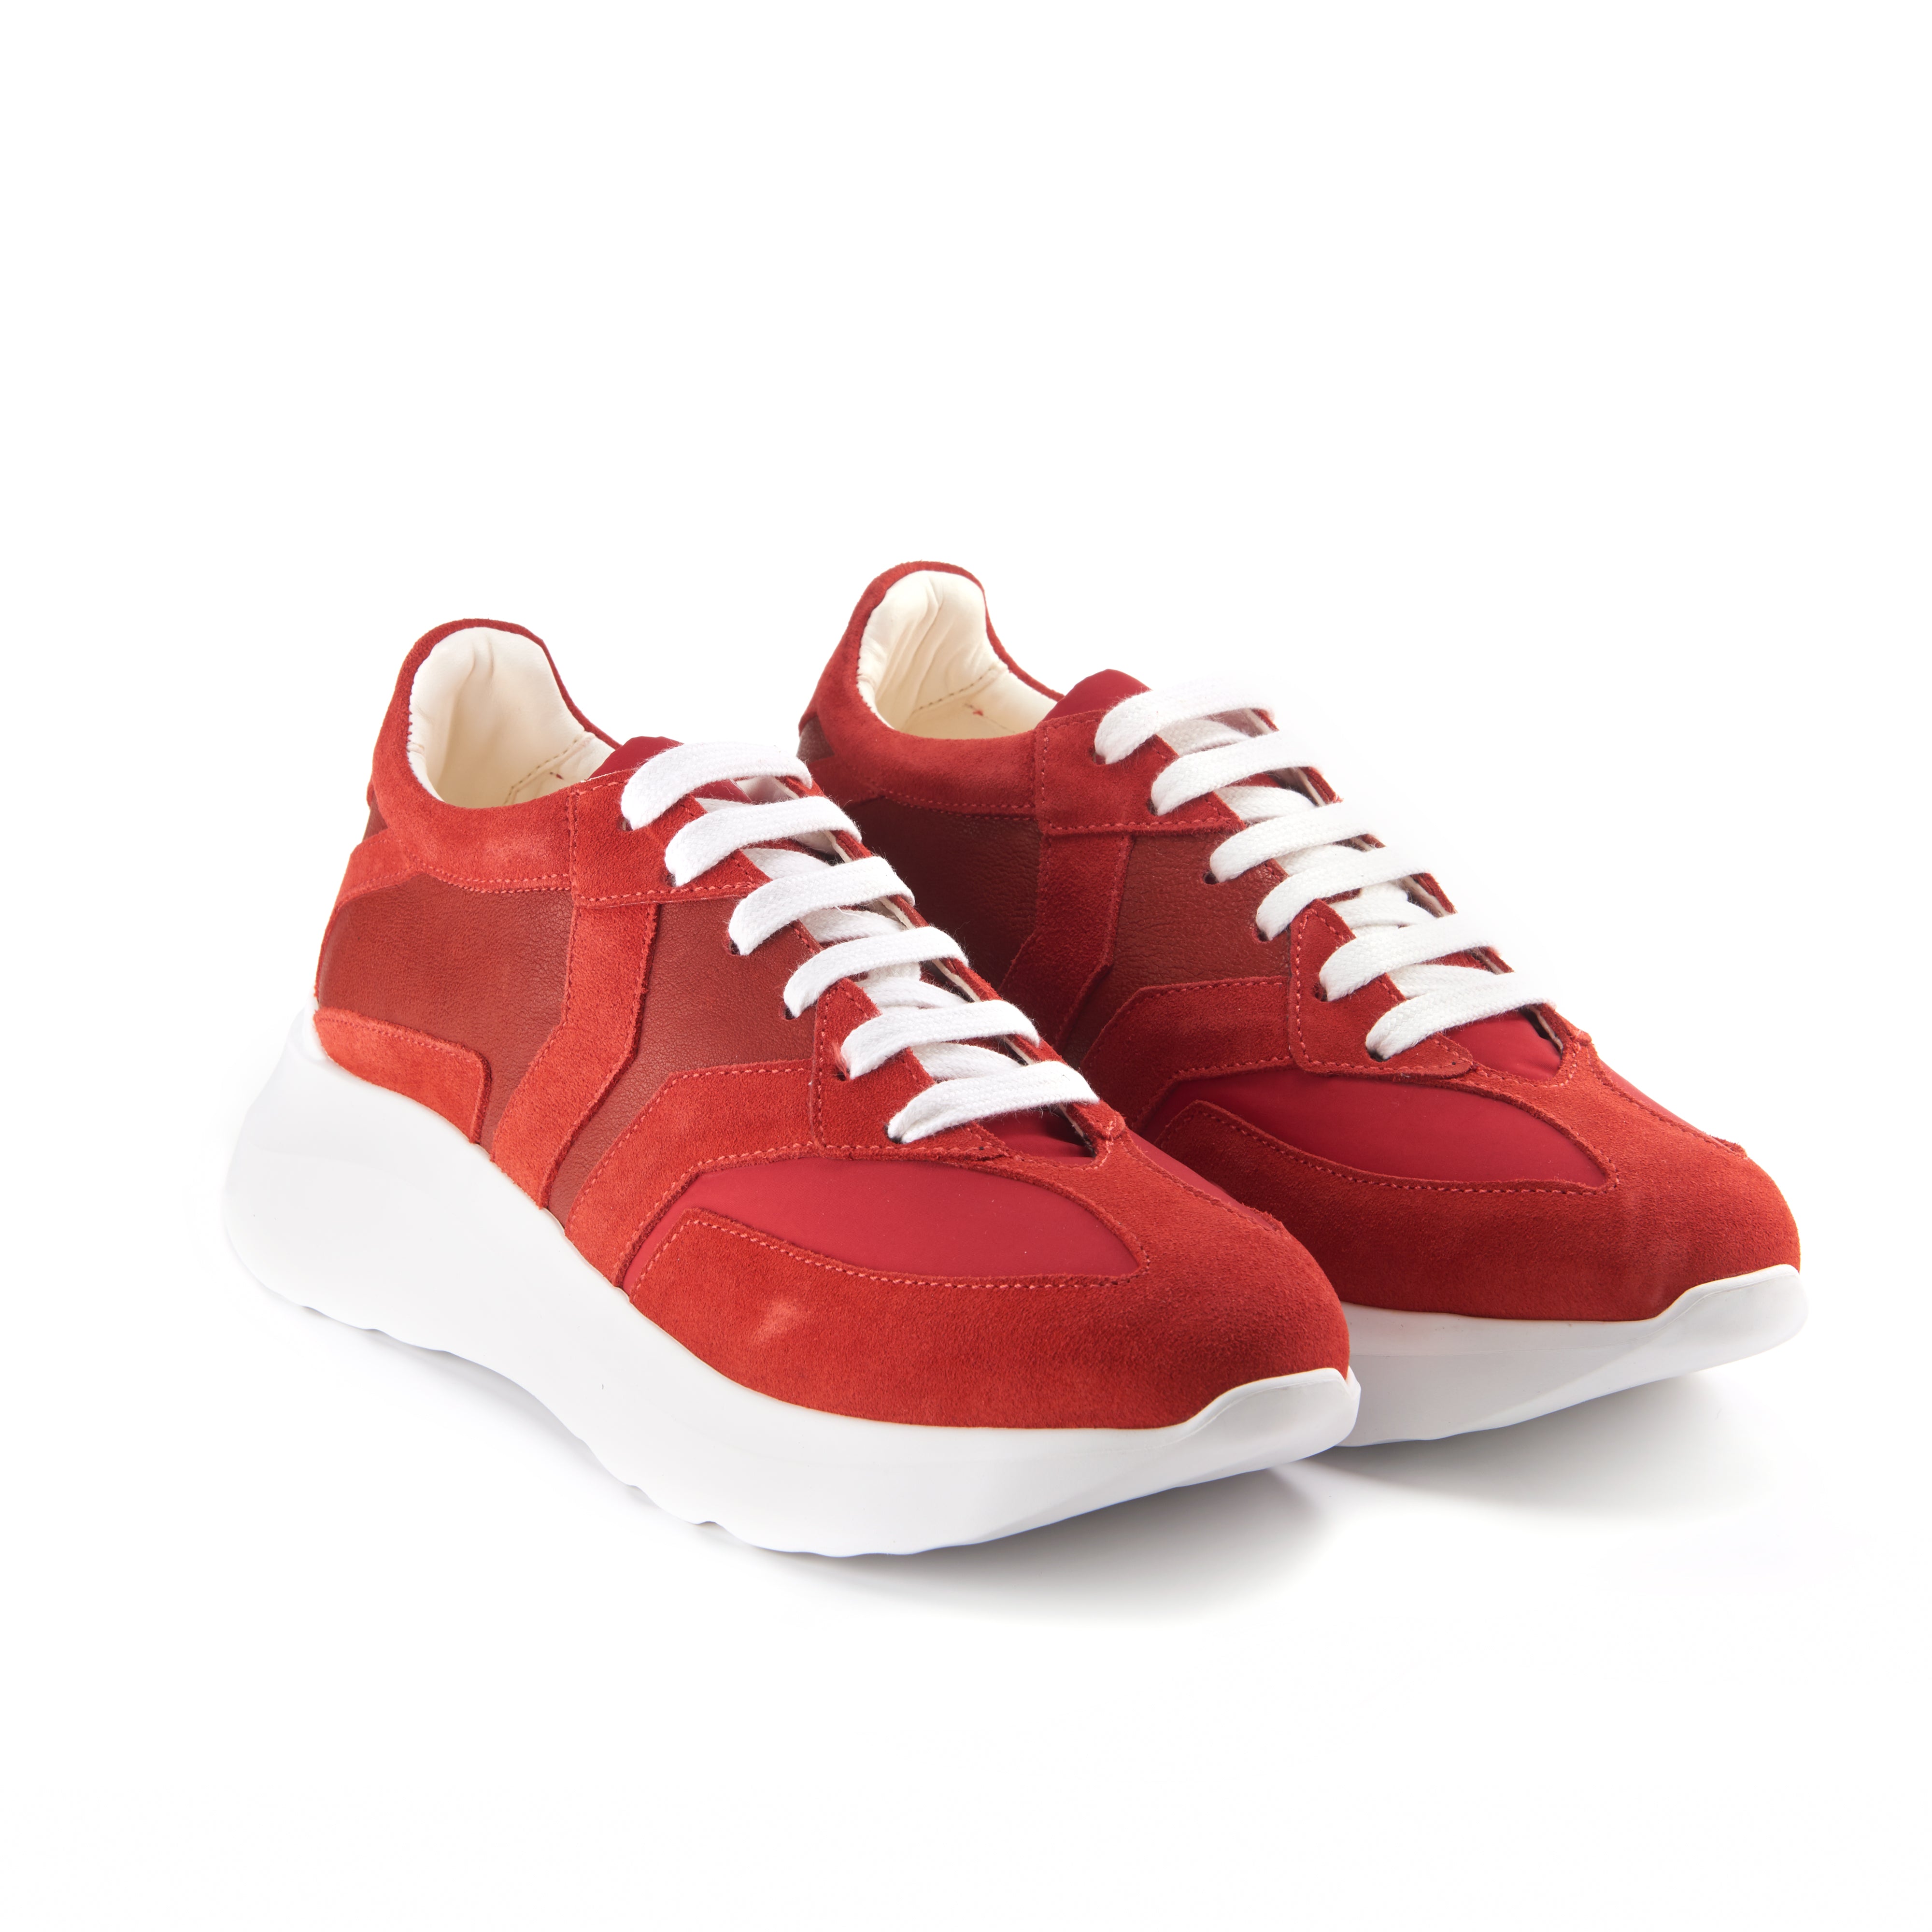 Free Soul_6 Women Red leather red wing low cut